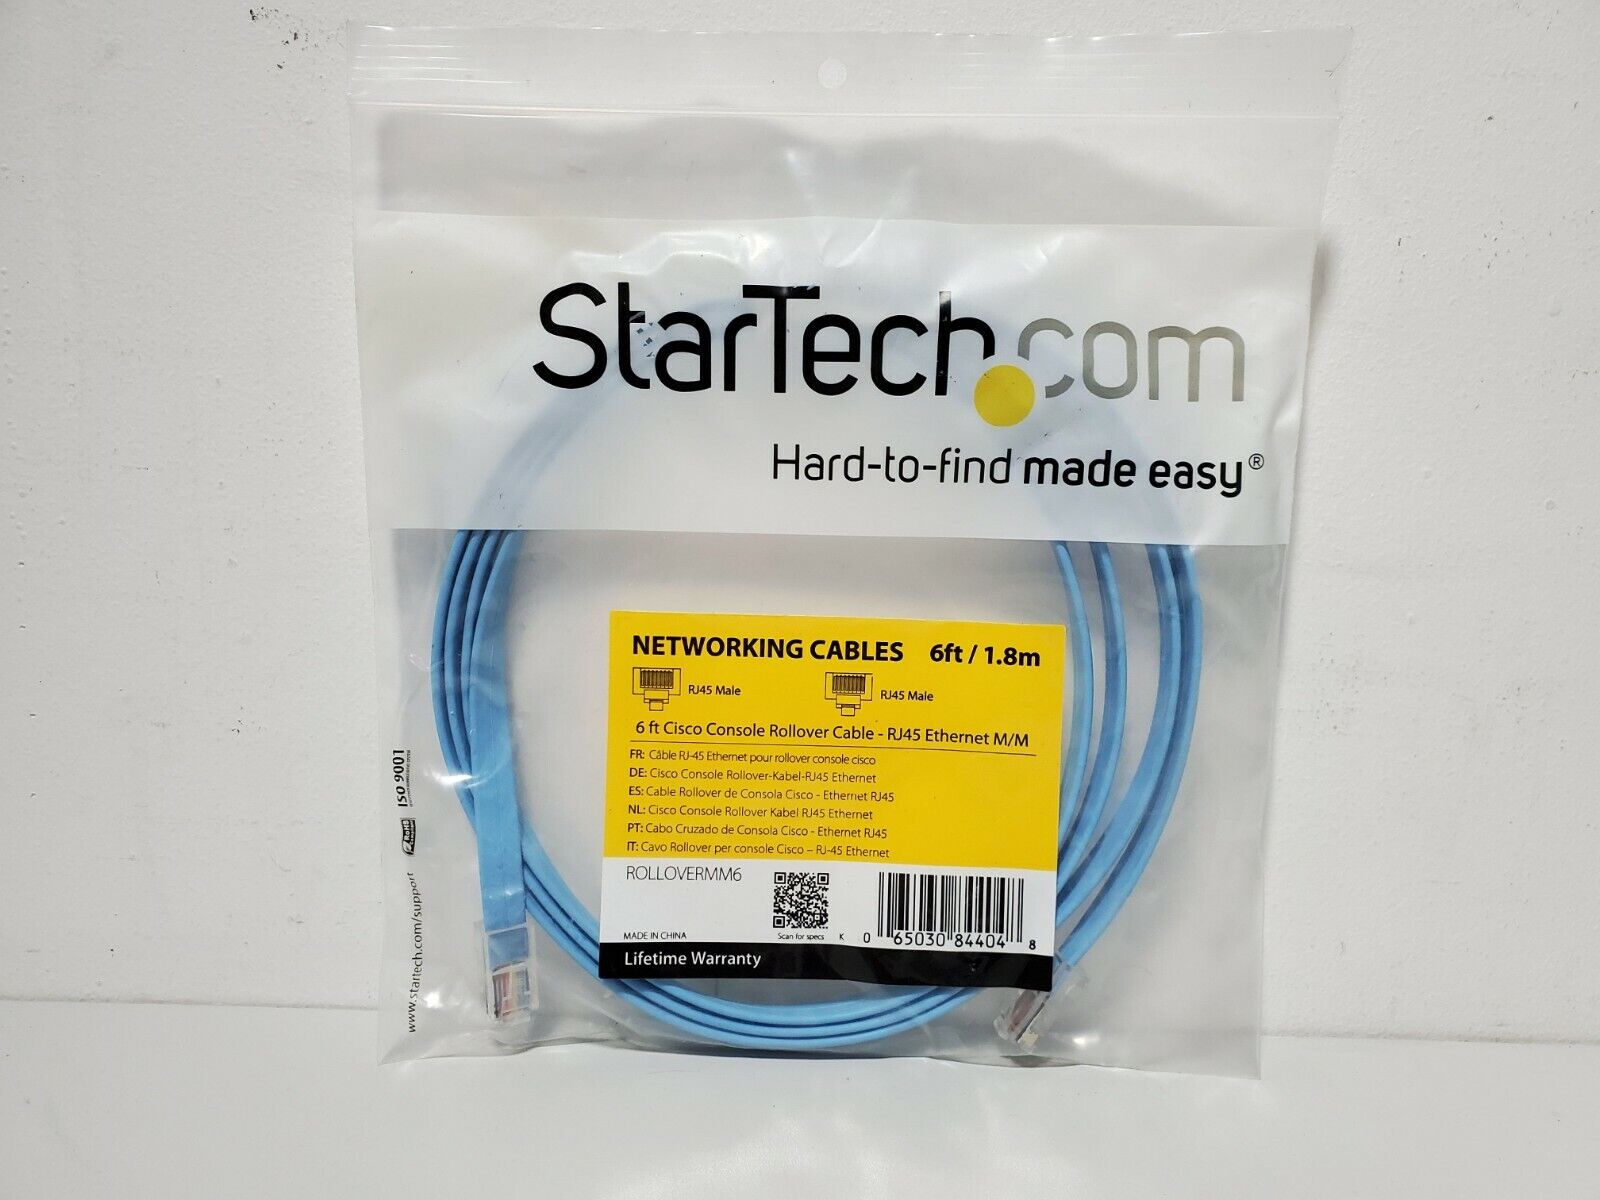 Startech ROLLOVERMM6 6 ft Cisco Console Rollover Cable - RJ45 M/M (Buy 1 get 2))